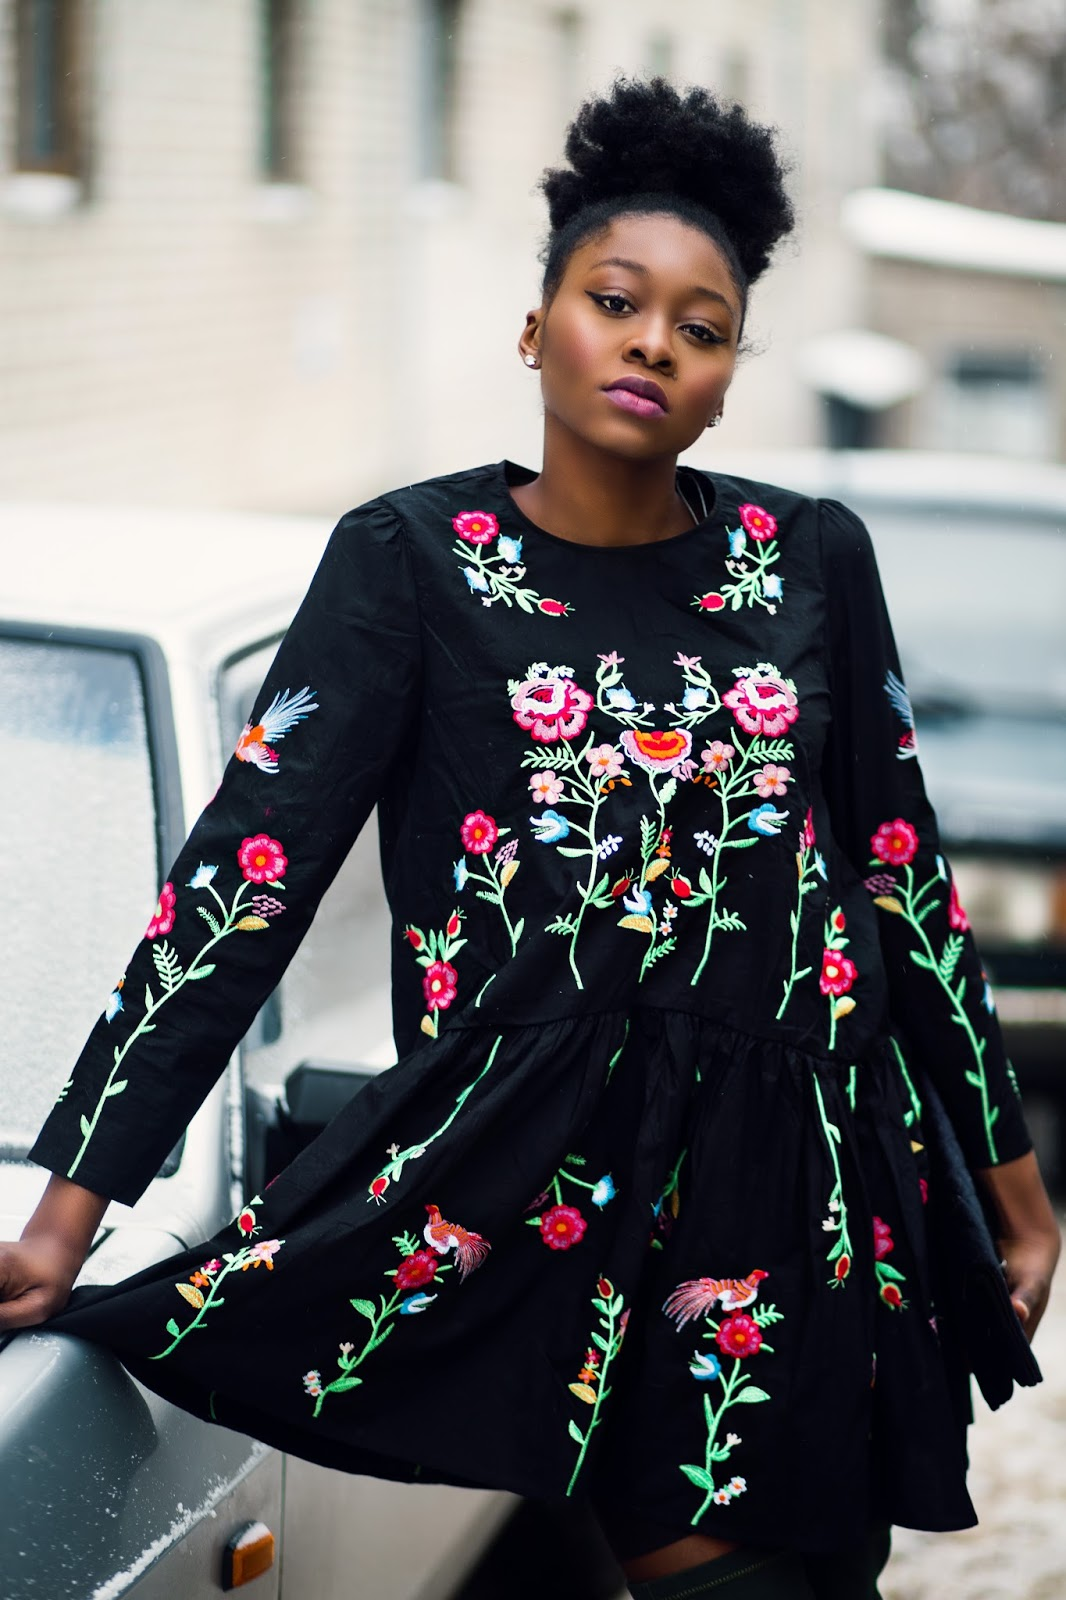 UK Fashion blogger wearing a Floral Embroidered dress